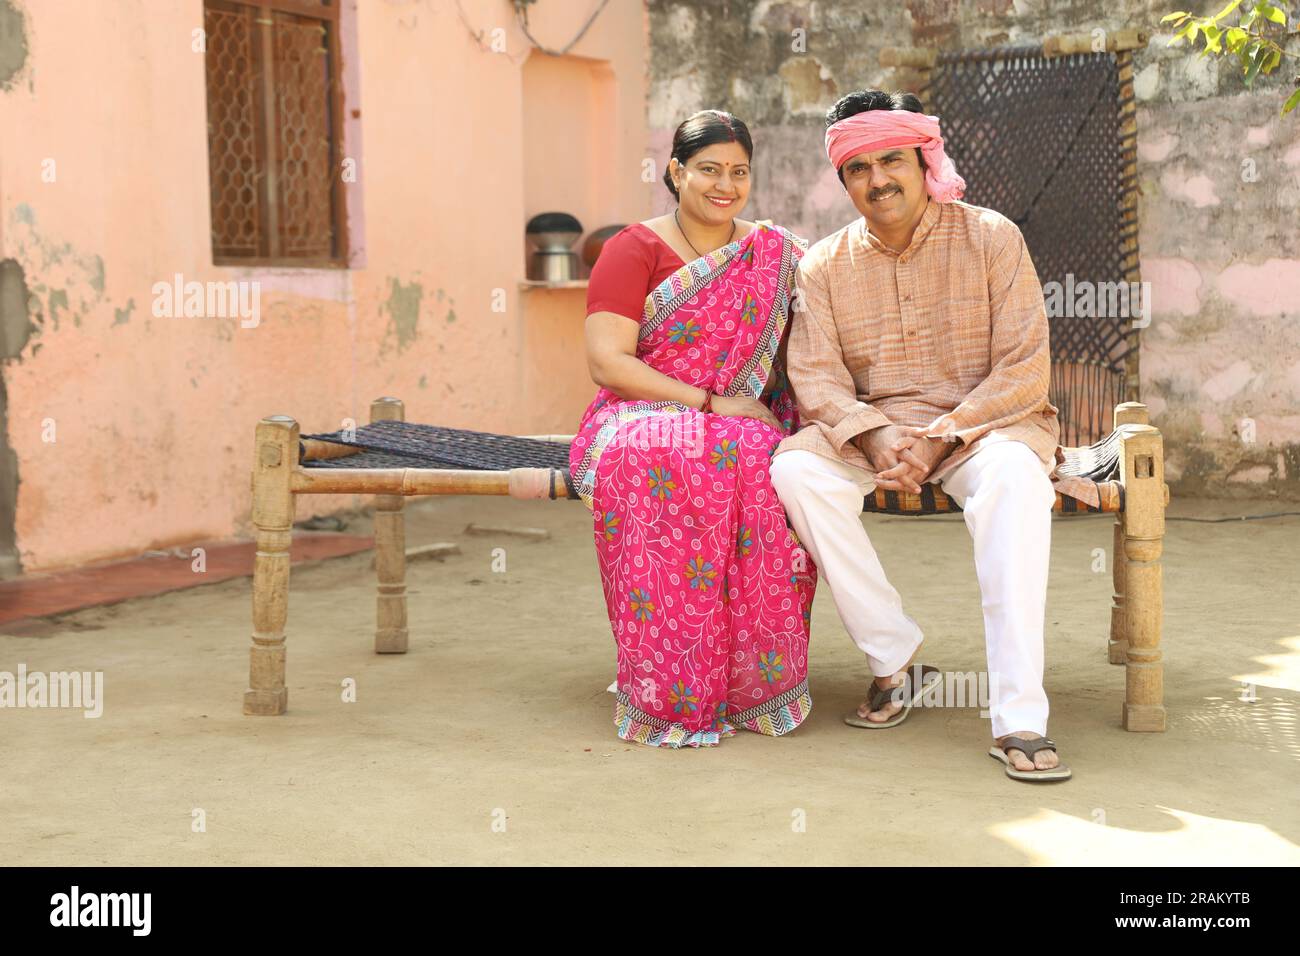 Indian rural farmer couple sitting outdoors together. Indian villager's attire. husband and wife sitting on cot. Rural Indian man and woman. Stock Photo